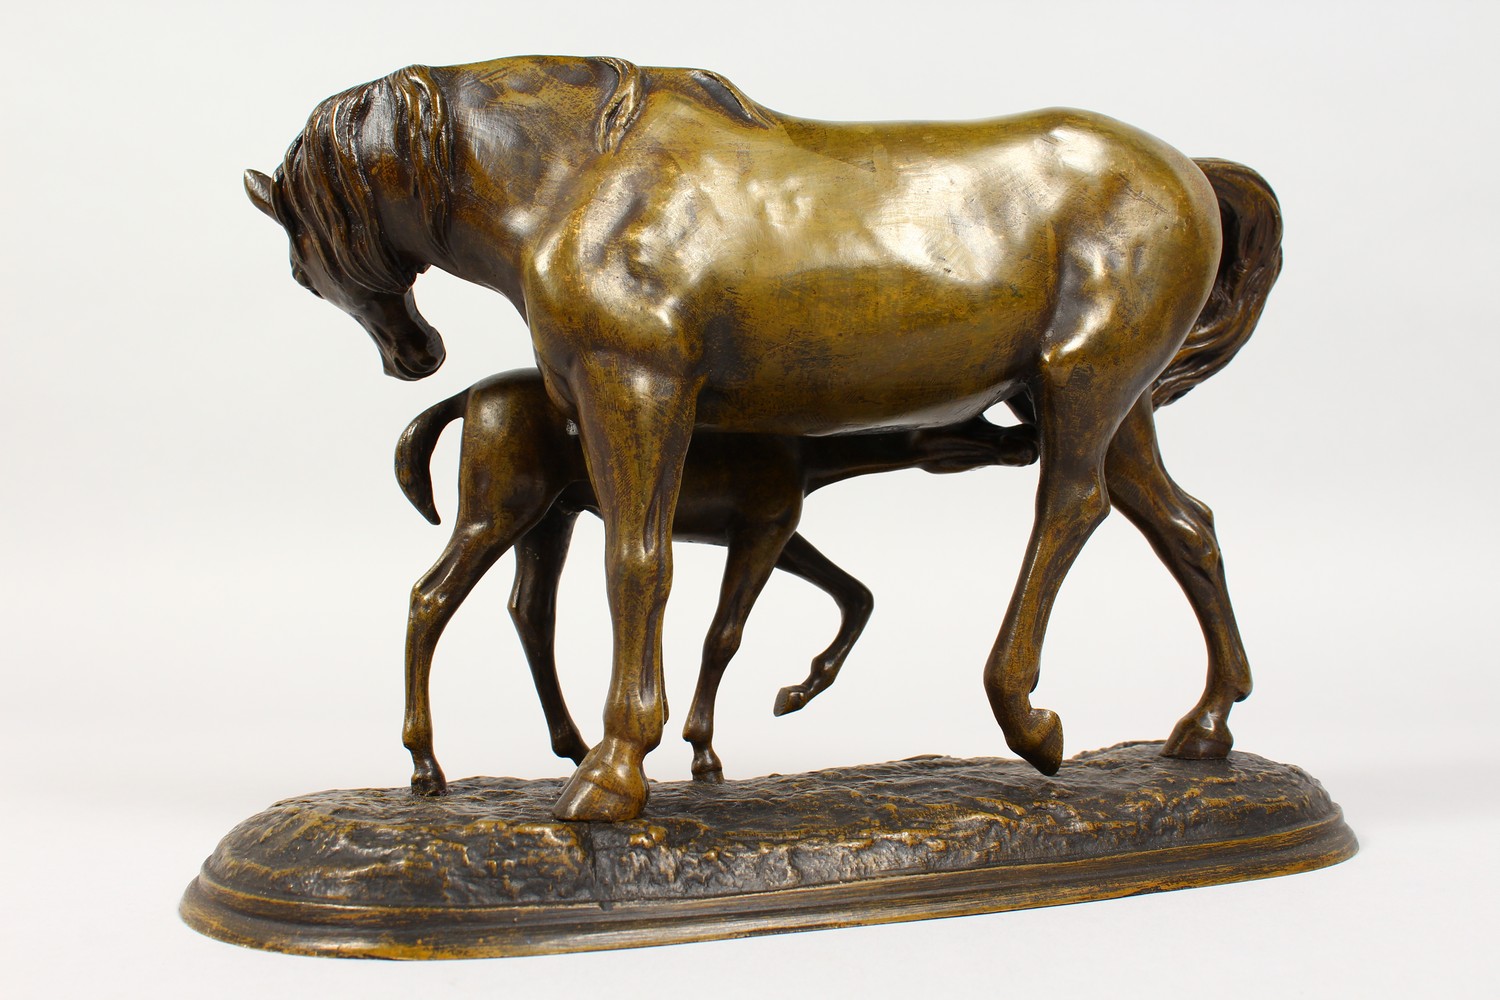 C. FRATIN (1800-1864) FRENCH A bronze mare and foal. Signed FRATIN. 10ins long x 7ins high. - Image 5 of 13